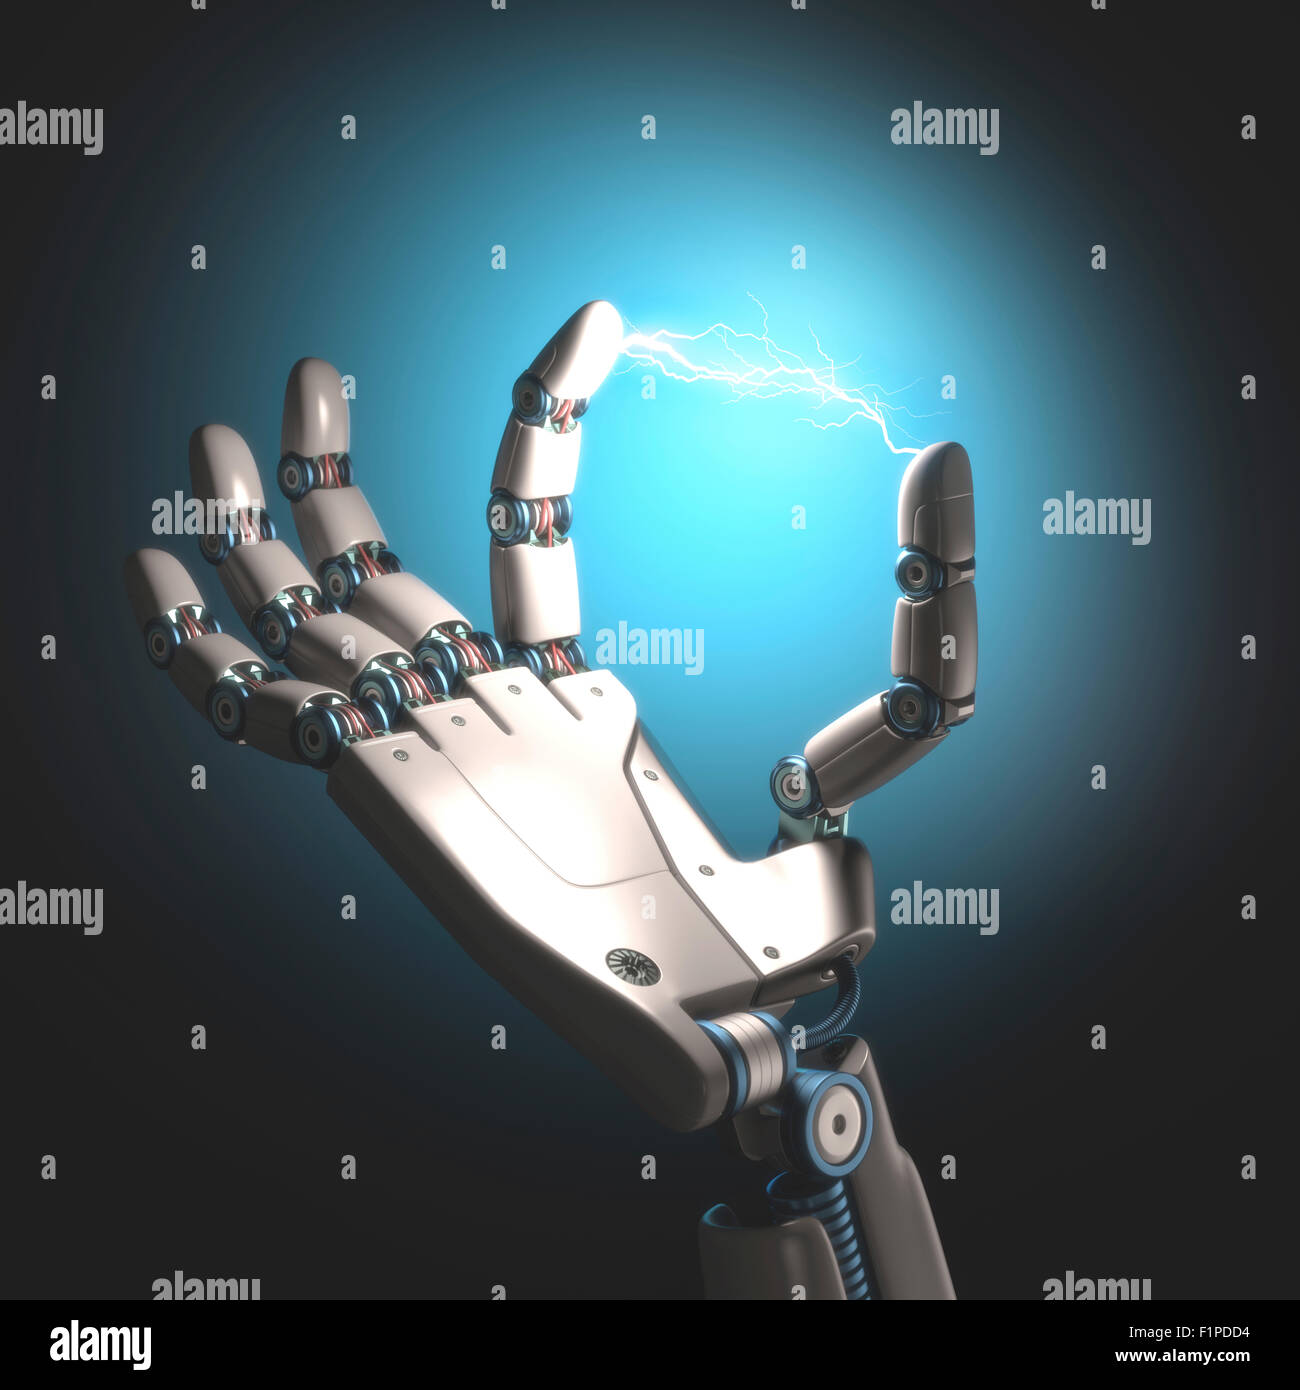 Robot hand with electric connection, computer illustration. Stock Photo